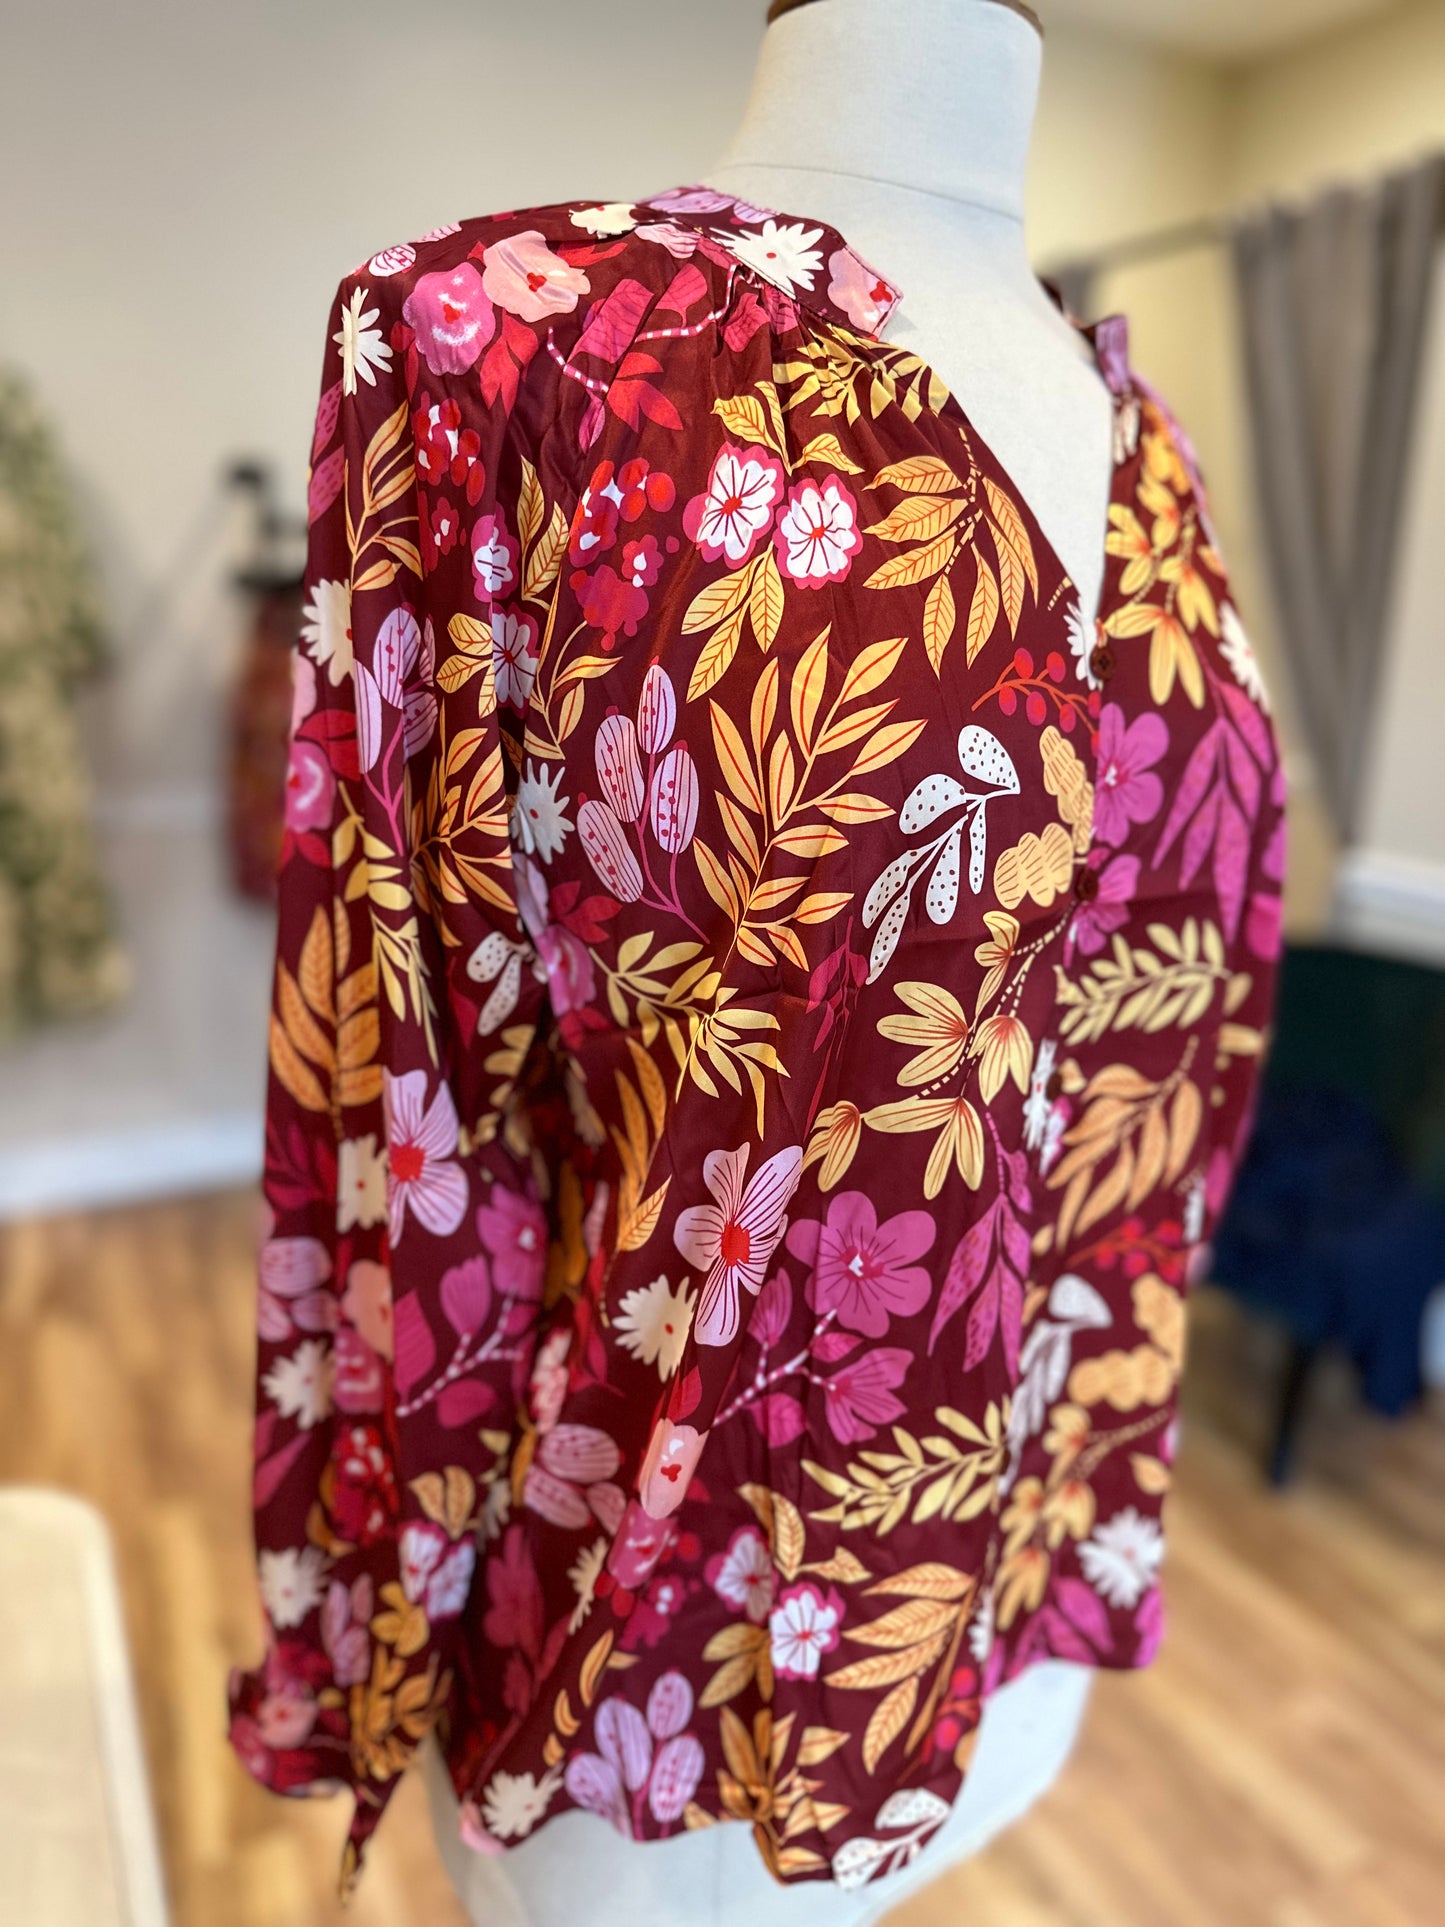 Southern Grace Floral Shirt in Maroon